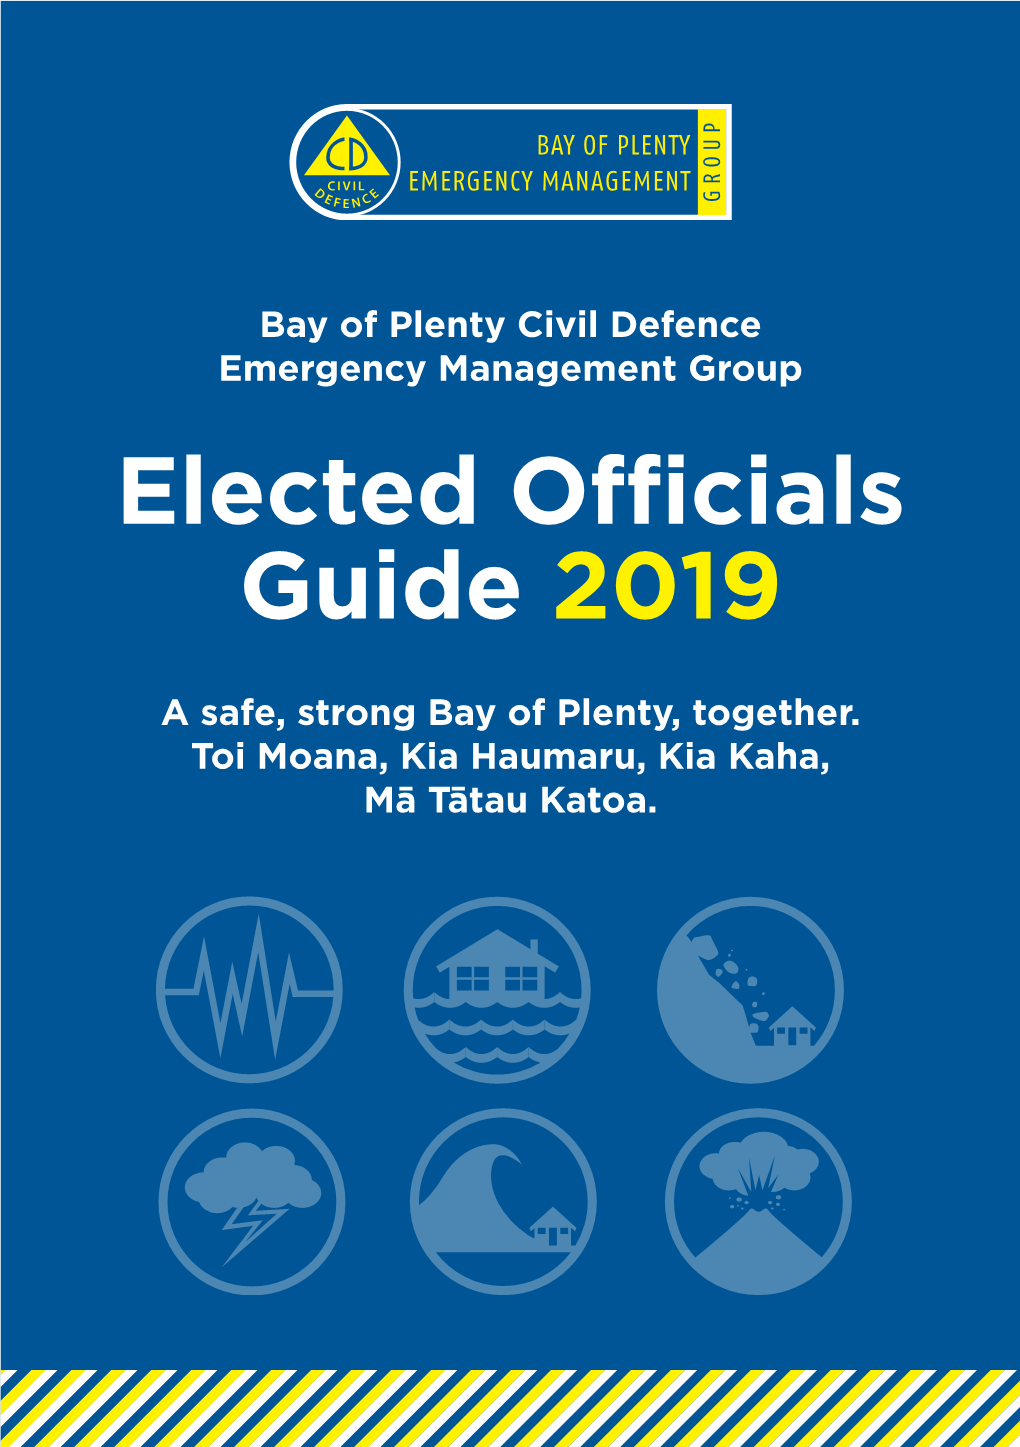 Elected Officials Guide 2019